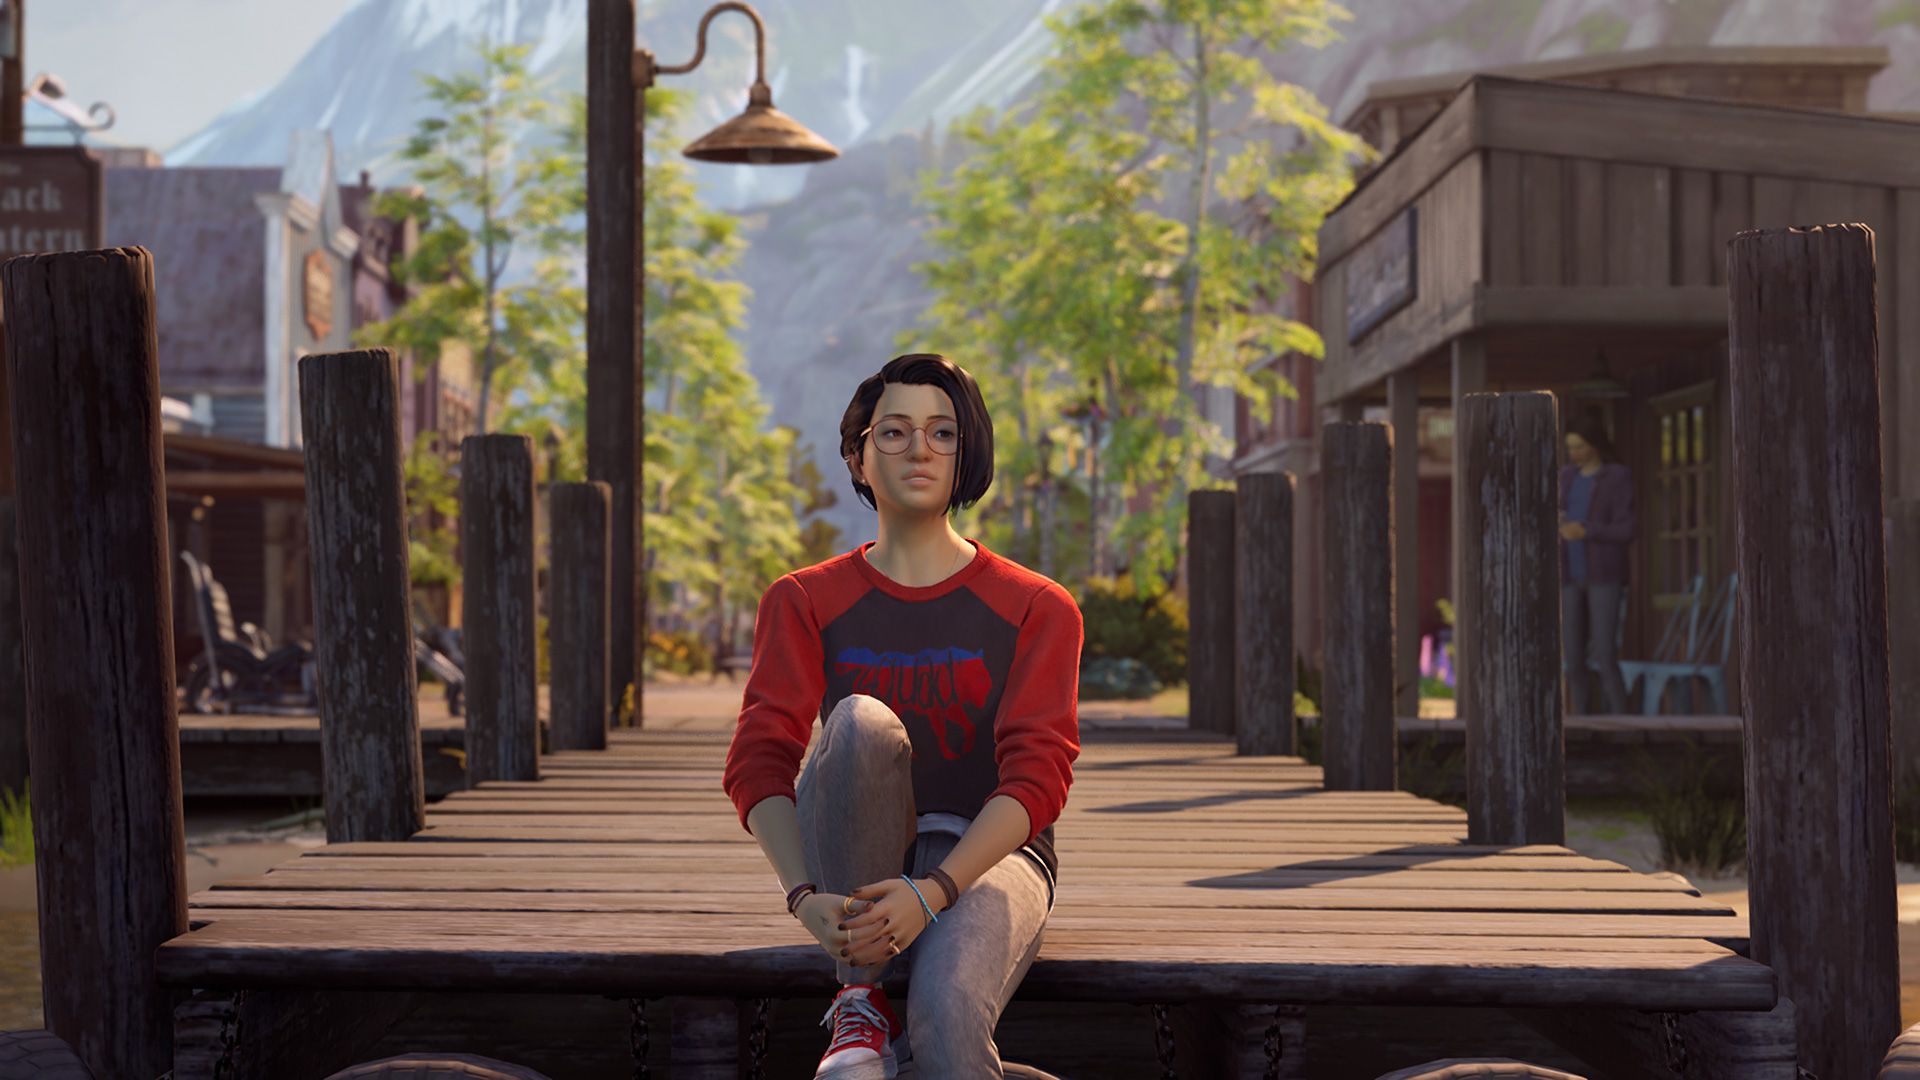 life is strange true colors switch download